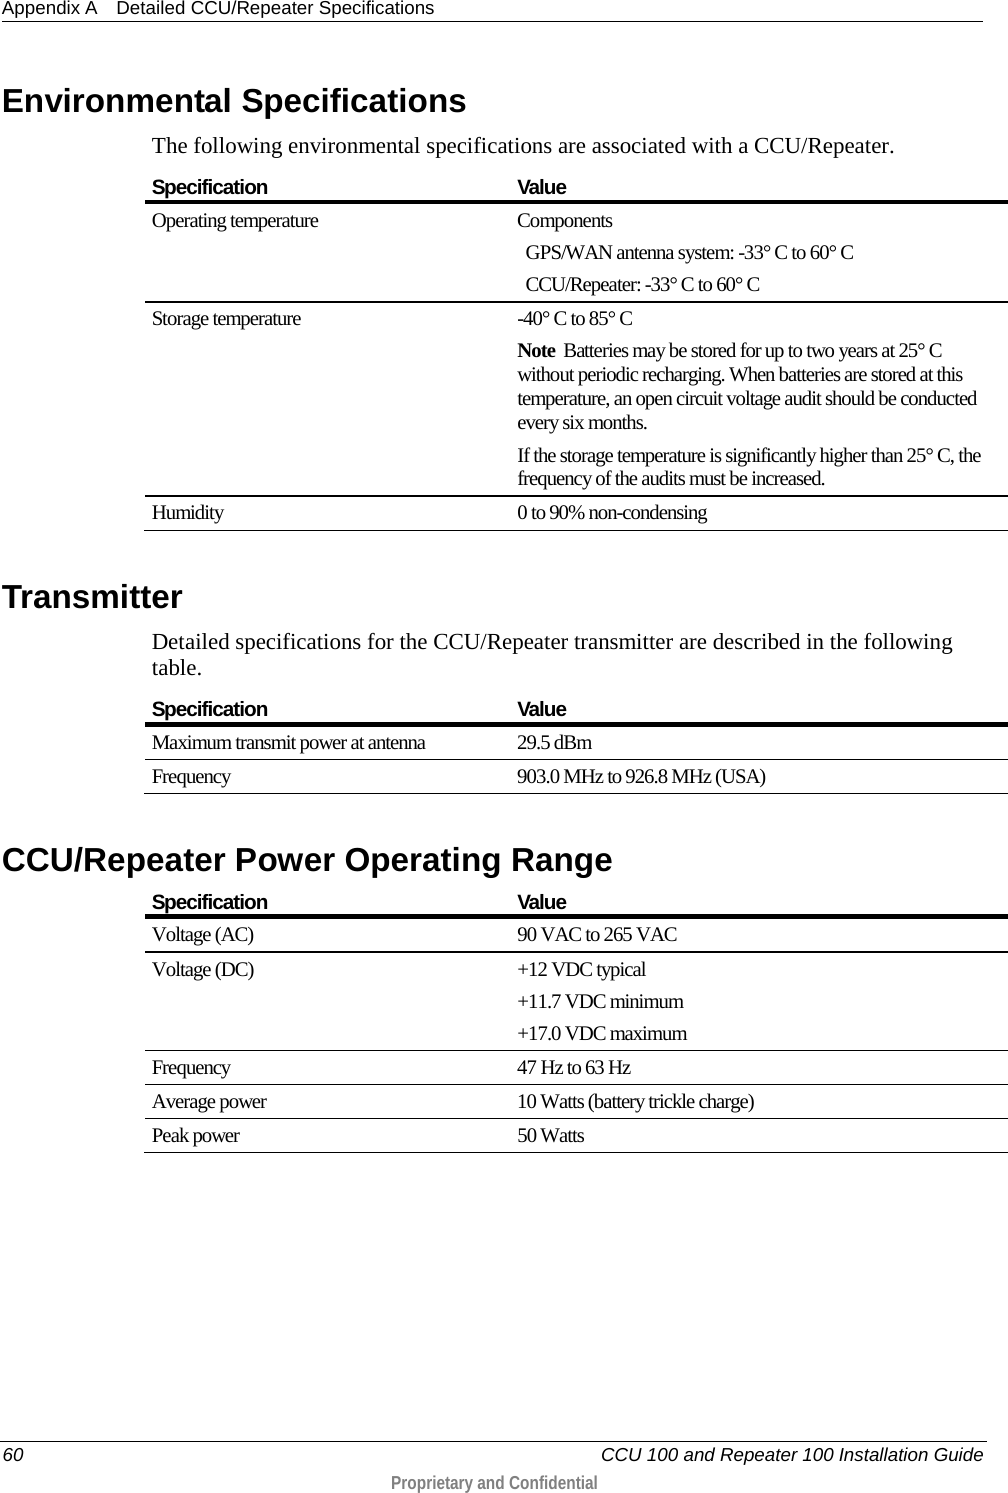 Appendix A Detailed CCU/Repeater Specifications  60   CCU 100 and Repeater 100 Installation Guide  Proprietary and Confidential   Environmental Specifications The following environmental specifications are associated with a CCU/Repeater.  Specification Value Operating temperature Components    GPS/WAN antenna system: -33° C to 60° C   CCU/Repeater: -33° C to 60° C Storage temperature  -40° C to 85° C Note  Batteries may be stored for up to two years at 25° C without periodic recharging. When batteries are stored at this temperature, an open circuit voltage audit should be conducted every six months.  If the storage temperature is significantly higher than 25° C, the frequency of the audits must be increased.  Humidity 0 to 90% non-condensing    Transmitter Detailed specifications for the CCU/Repeater transmitter are described in the following table.  Specification Value Maximum transmit power at antenna 29.5 dBm Frequency 903.0 MHz to 926.8 MHz (USA)   CCU/Repeater Power Operating Range   Specification Value Voltage (AC) 90 VAC to 265 VAC Voltage (DC) +12 VDC typical +11.7 VDC minimum +17.0 VDC maximum Frequency  47 Hz to 63 Hz  Average power 10 Watts (battery trickle charge) Peak power 50 Watts   